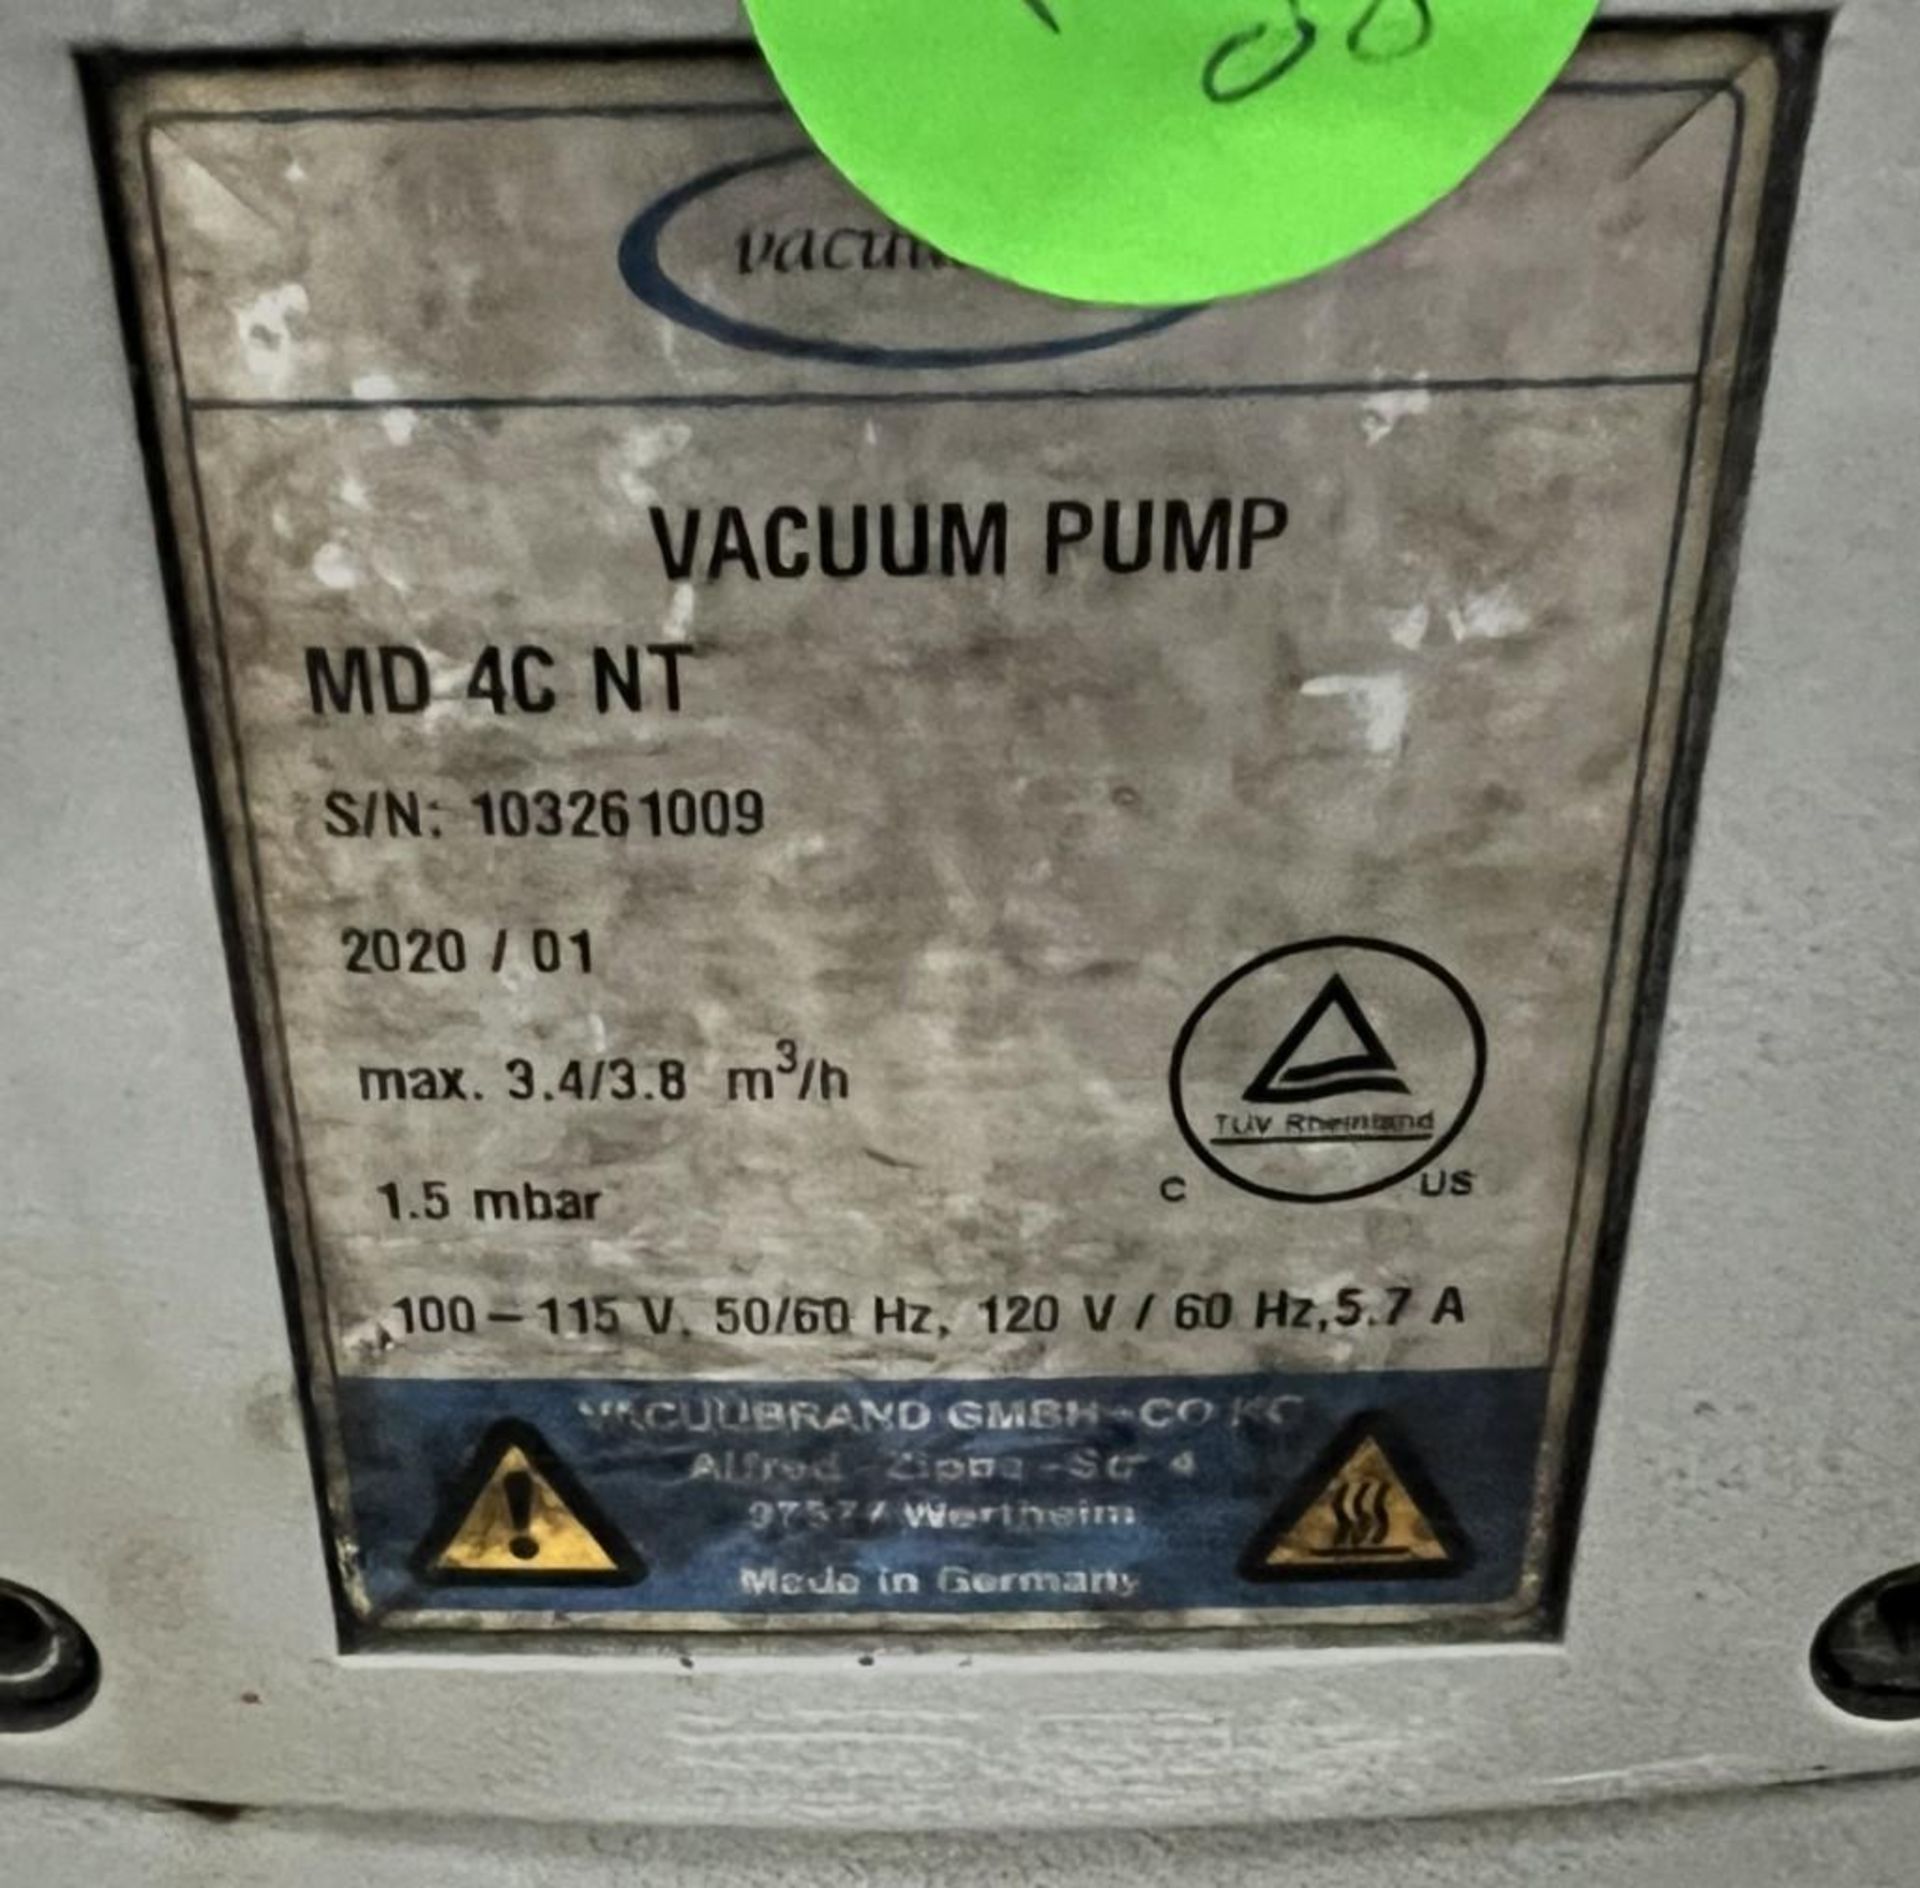 Lot Of (5) Vacuum Pumps. With (3) Vacuubrand model MD-4C-NT, Serial# 103261009, 103462312, 103346605 - Image 3 of 11